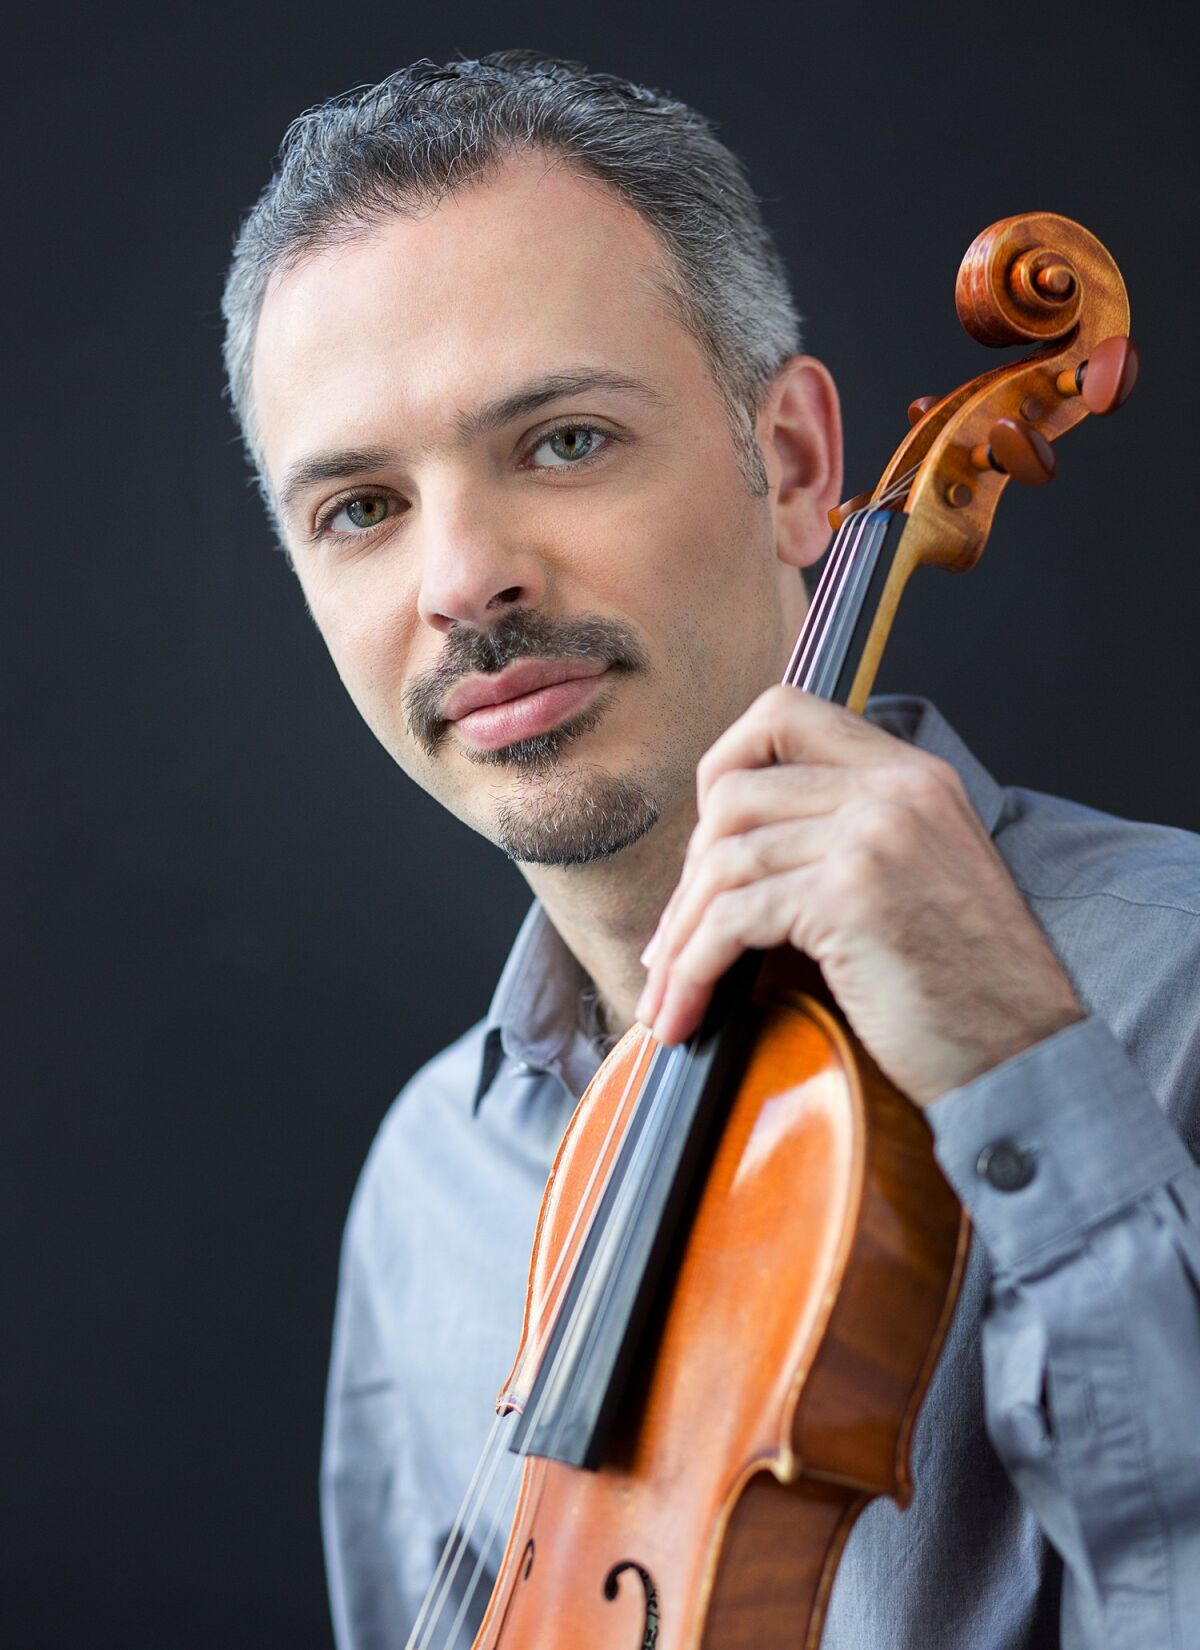 Violinist Colin Jacobsen will perform Monday, Nov. 21, at the Athenaeum Music & Arts Library in La Jolla.